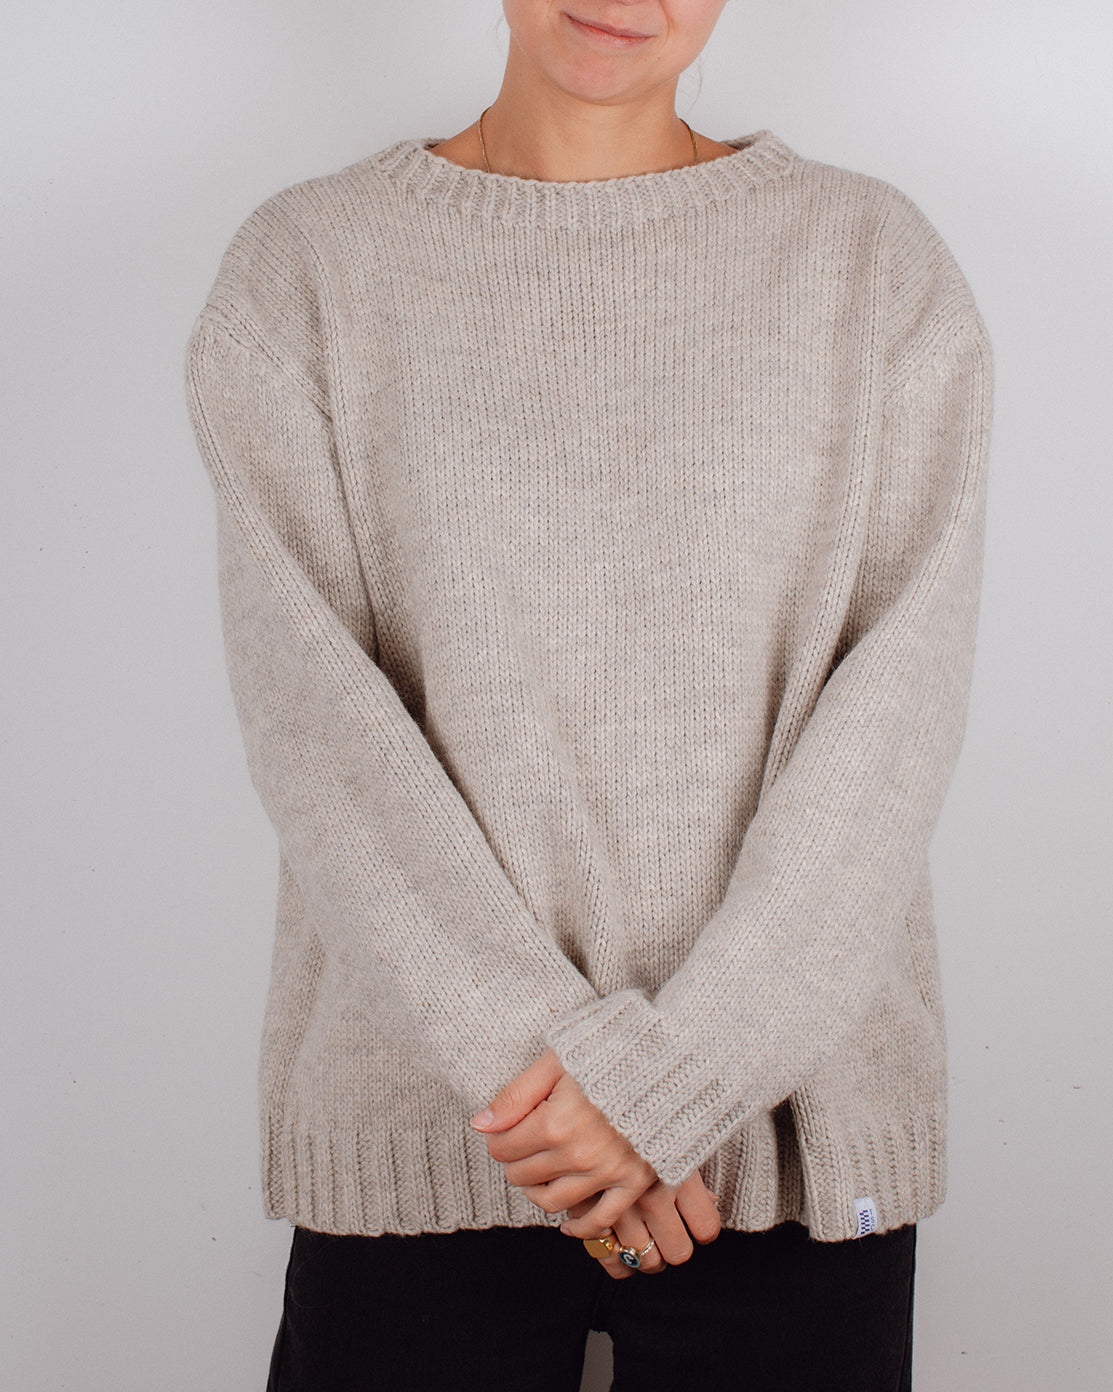 The Sweater Cool Beige